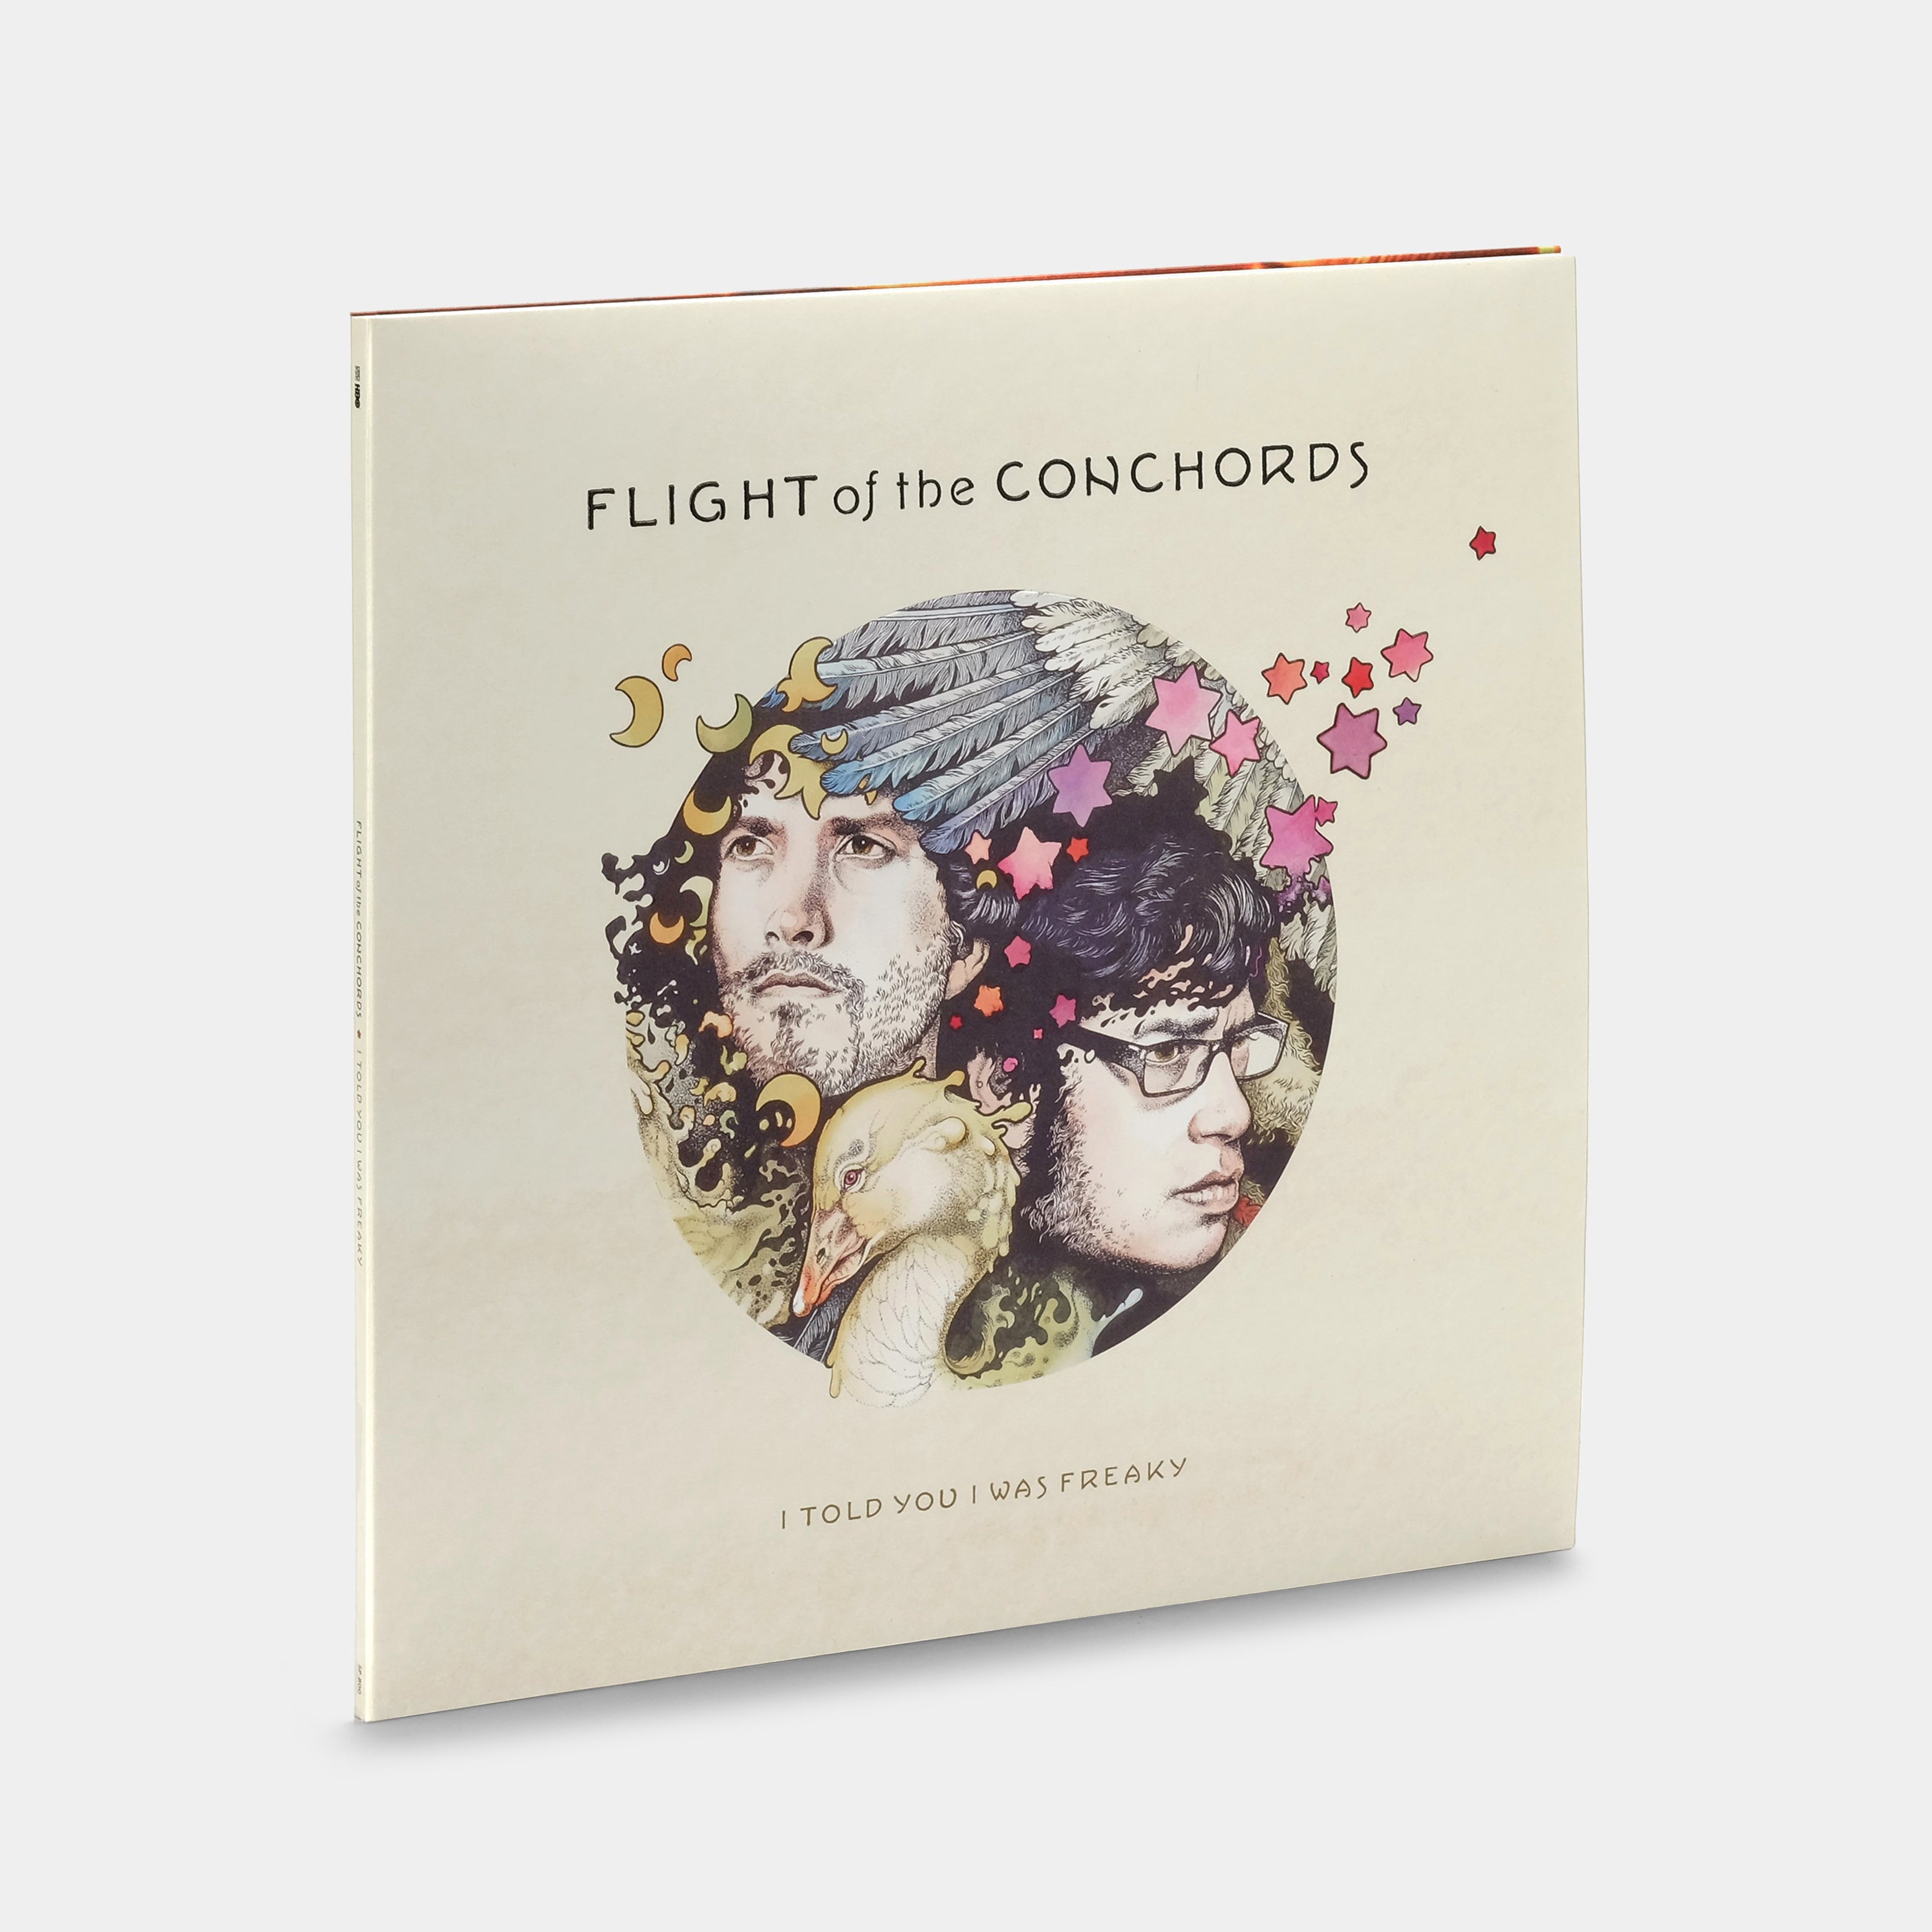 Flight of the Conchords - I Told You I Was Freaky LP Vinyl Record